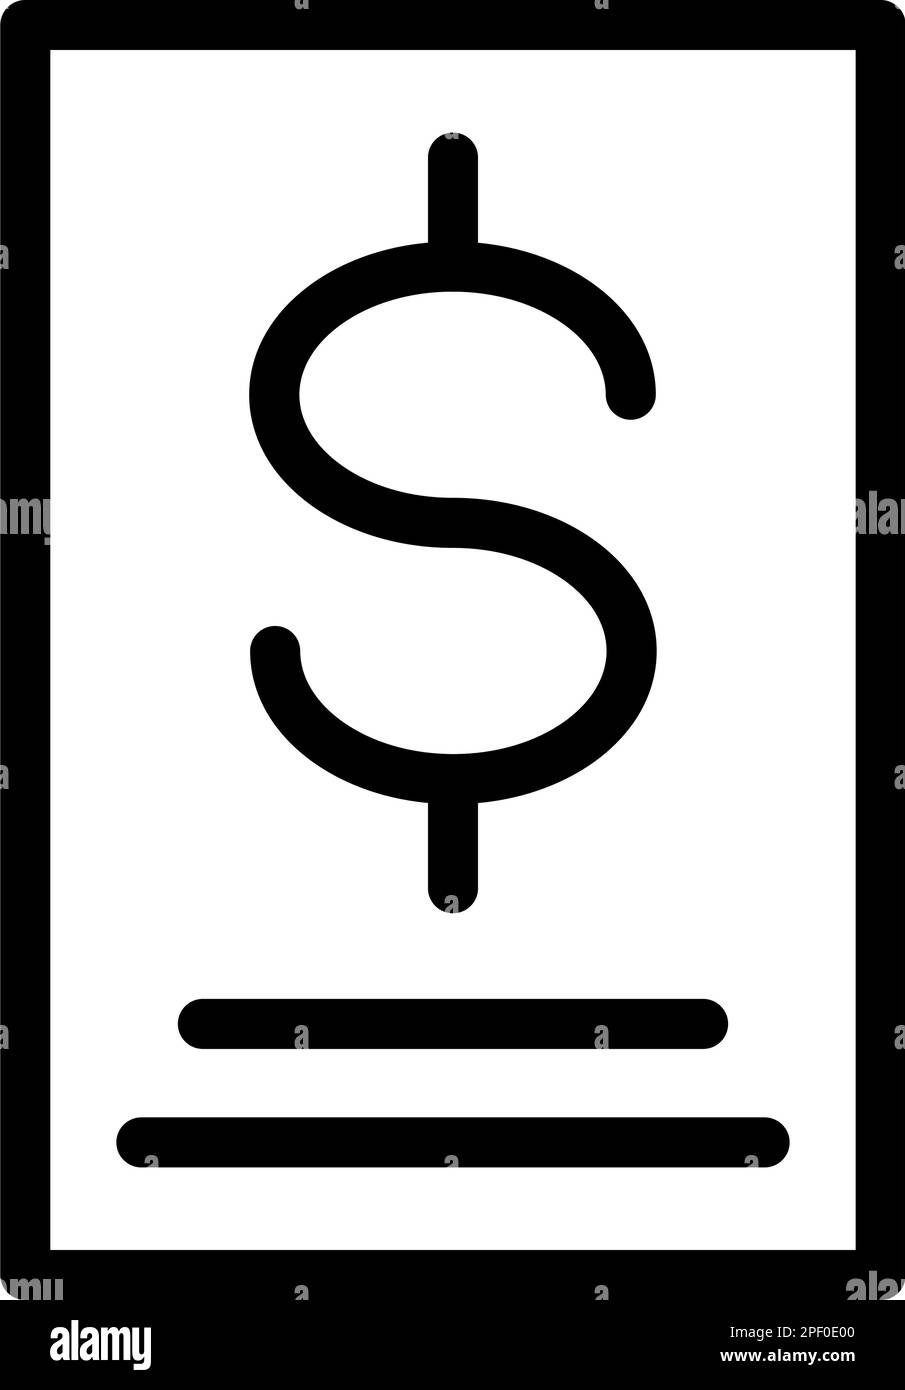 Invoice Vector Thick Line Icon For Personal And Commercial Use. Stock Vector